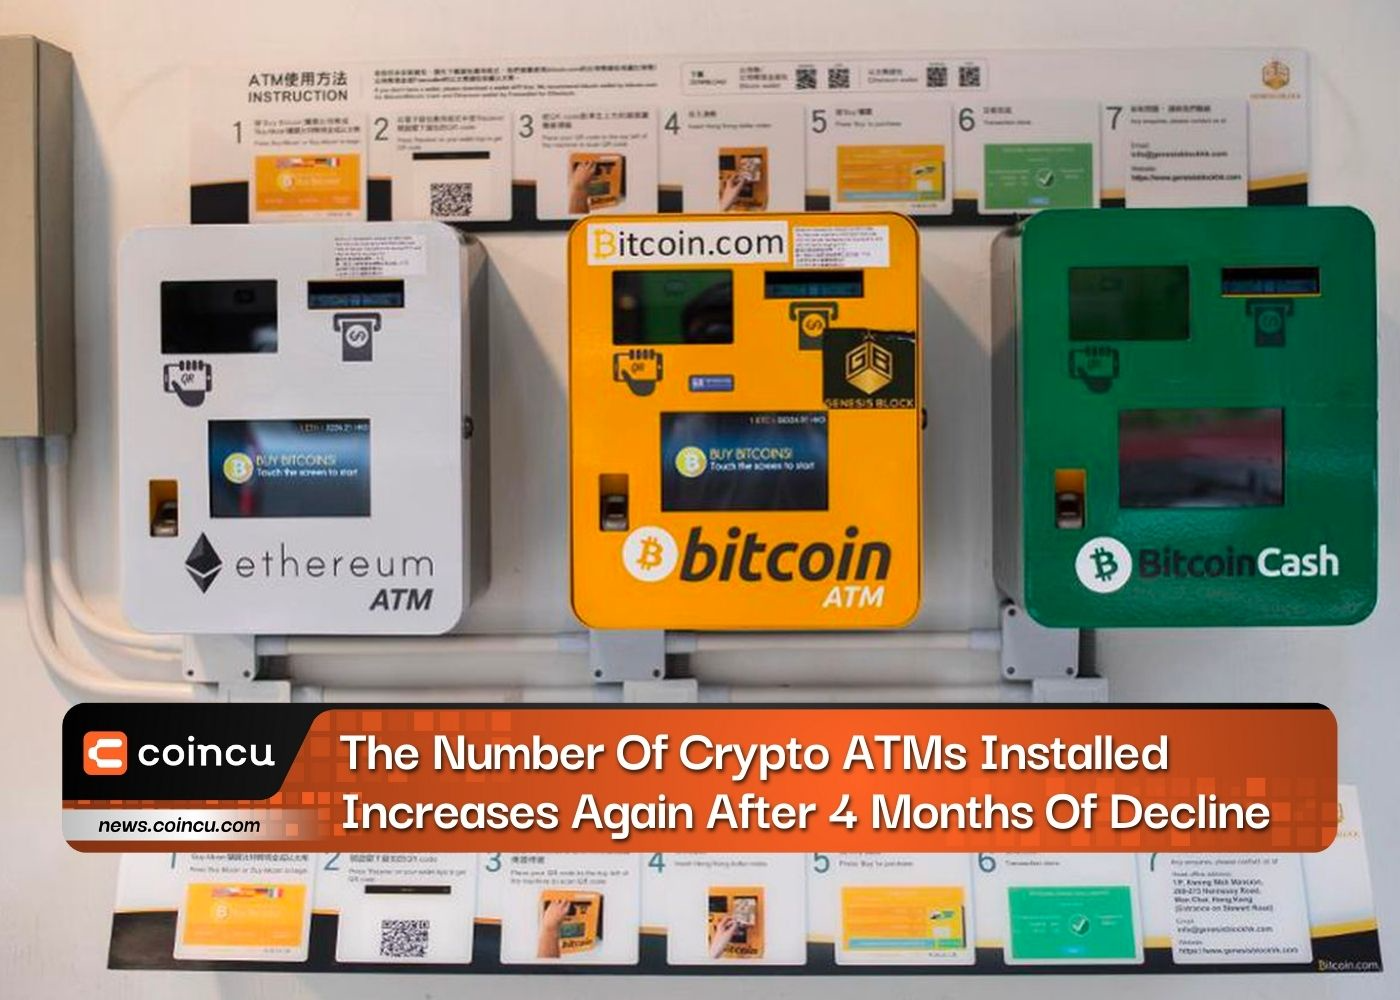 The Number Of Crypto ATMs Installed Increases Again After 4 Months Of Decline